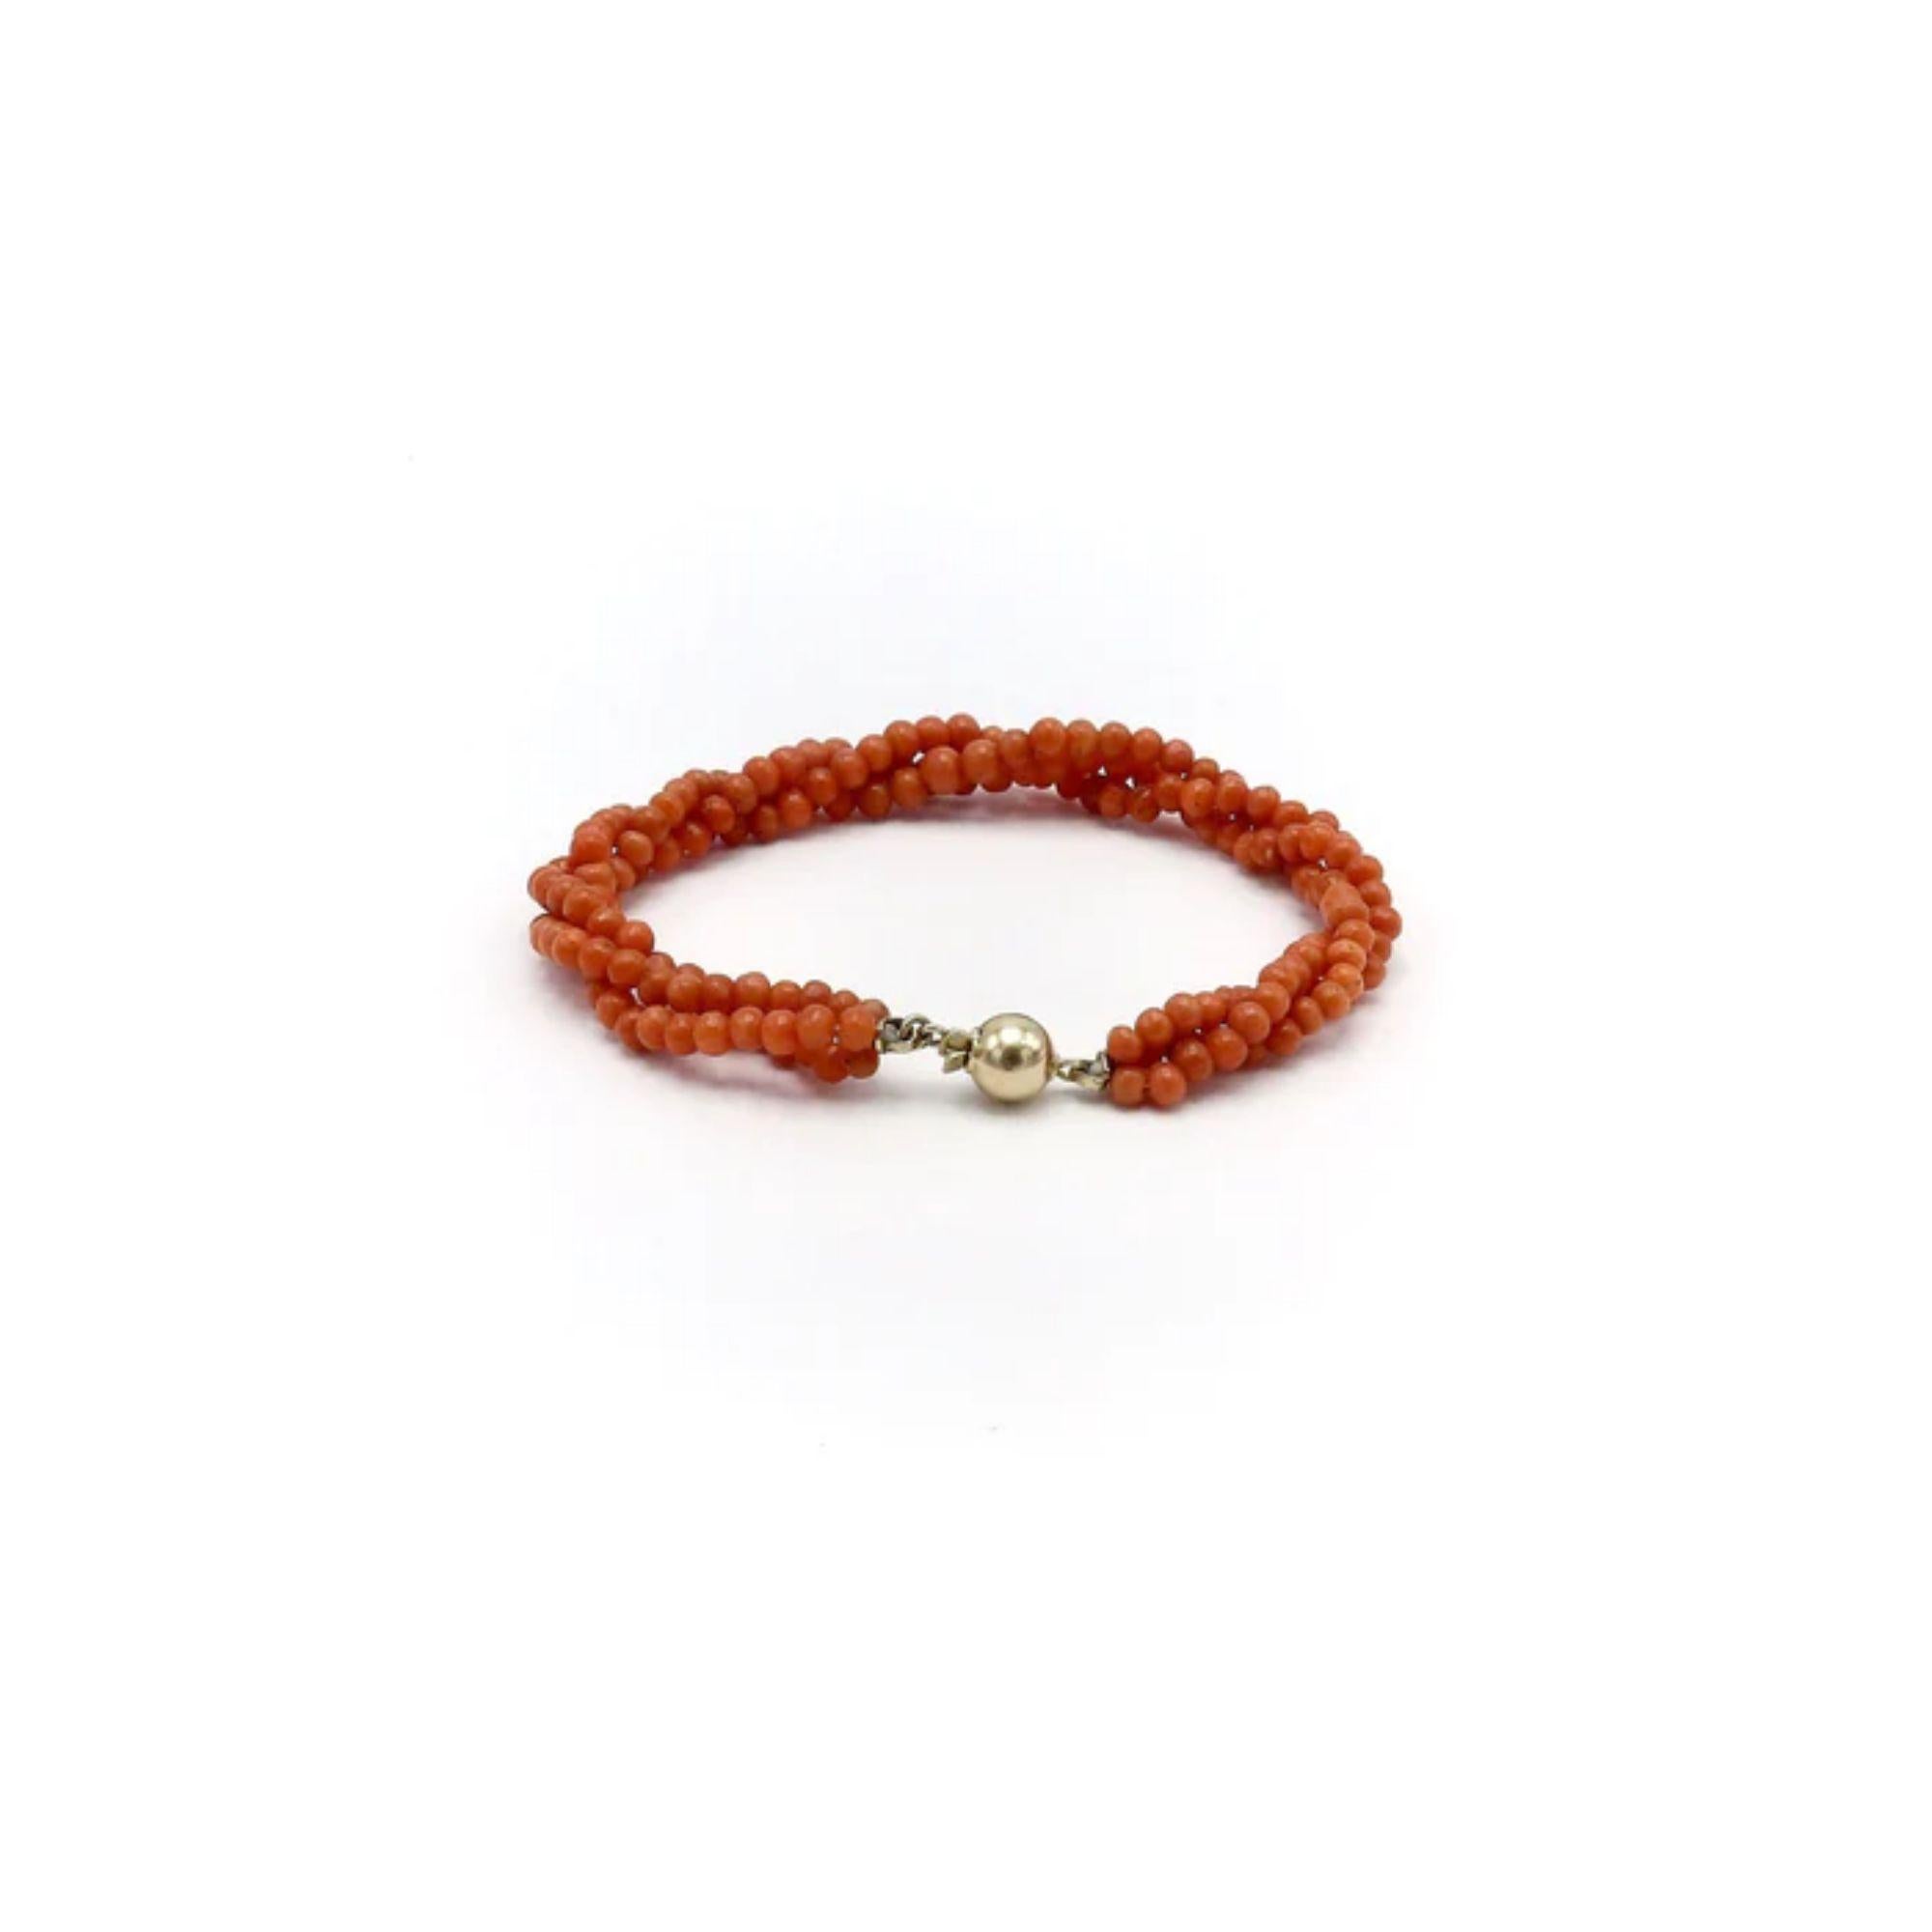 Bead Triple Strand Victorian Salmon Coral Bracelet with 14K Gold Clasp, Circa 1900 For Sale